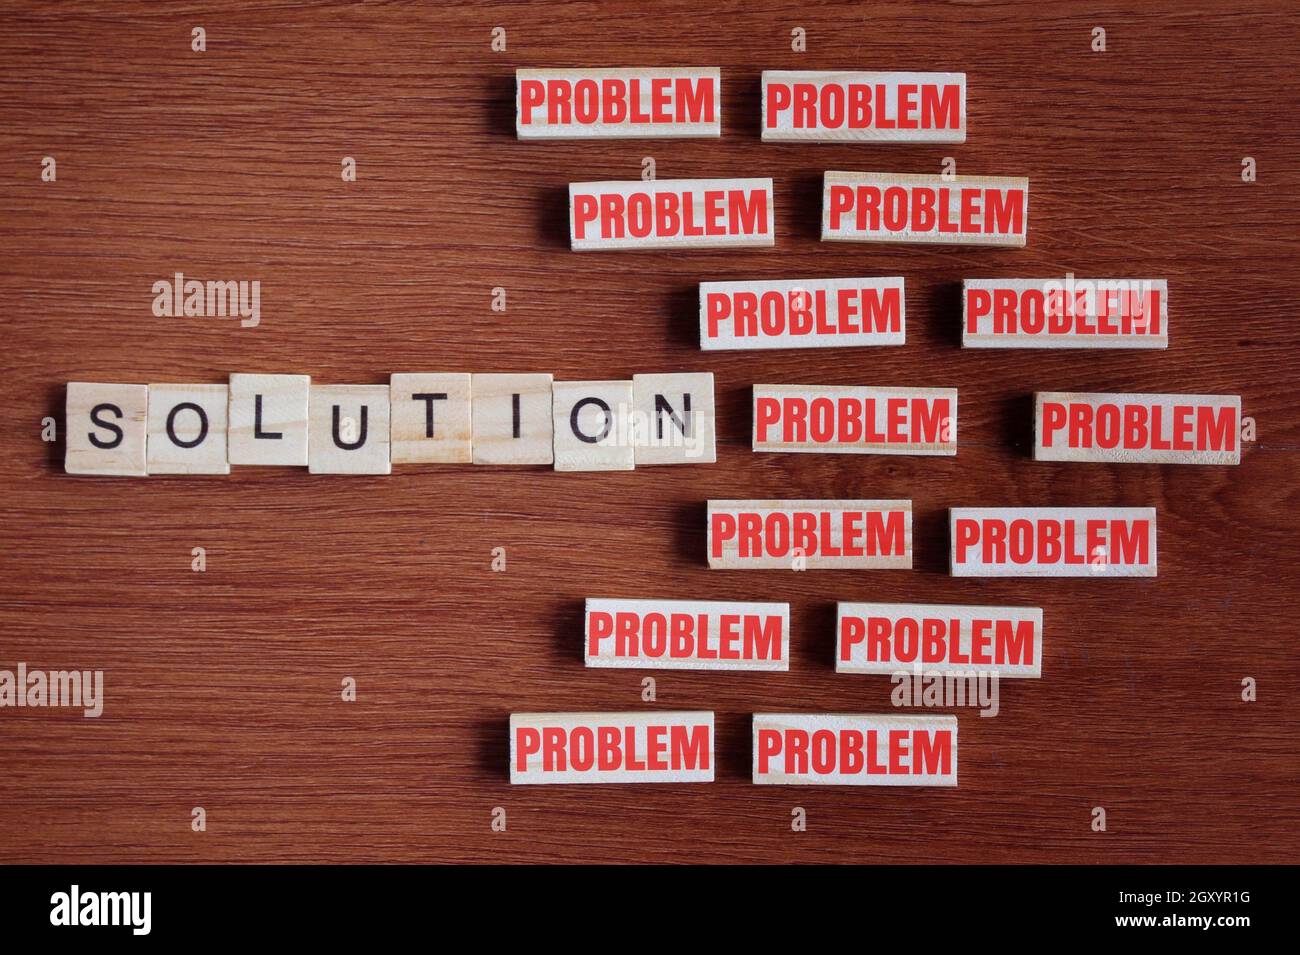 Concept of problem solving. Look for the solution inside the problem. Top view of wooden tiles with text PROBLEM and SOLUTION Stock Photo